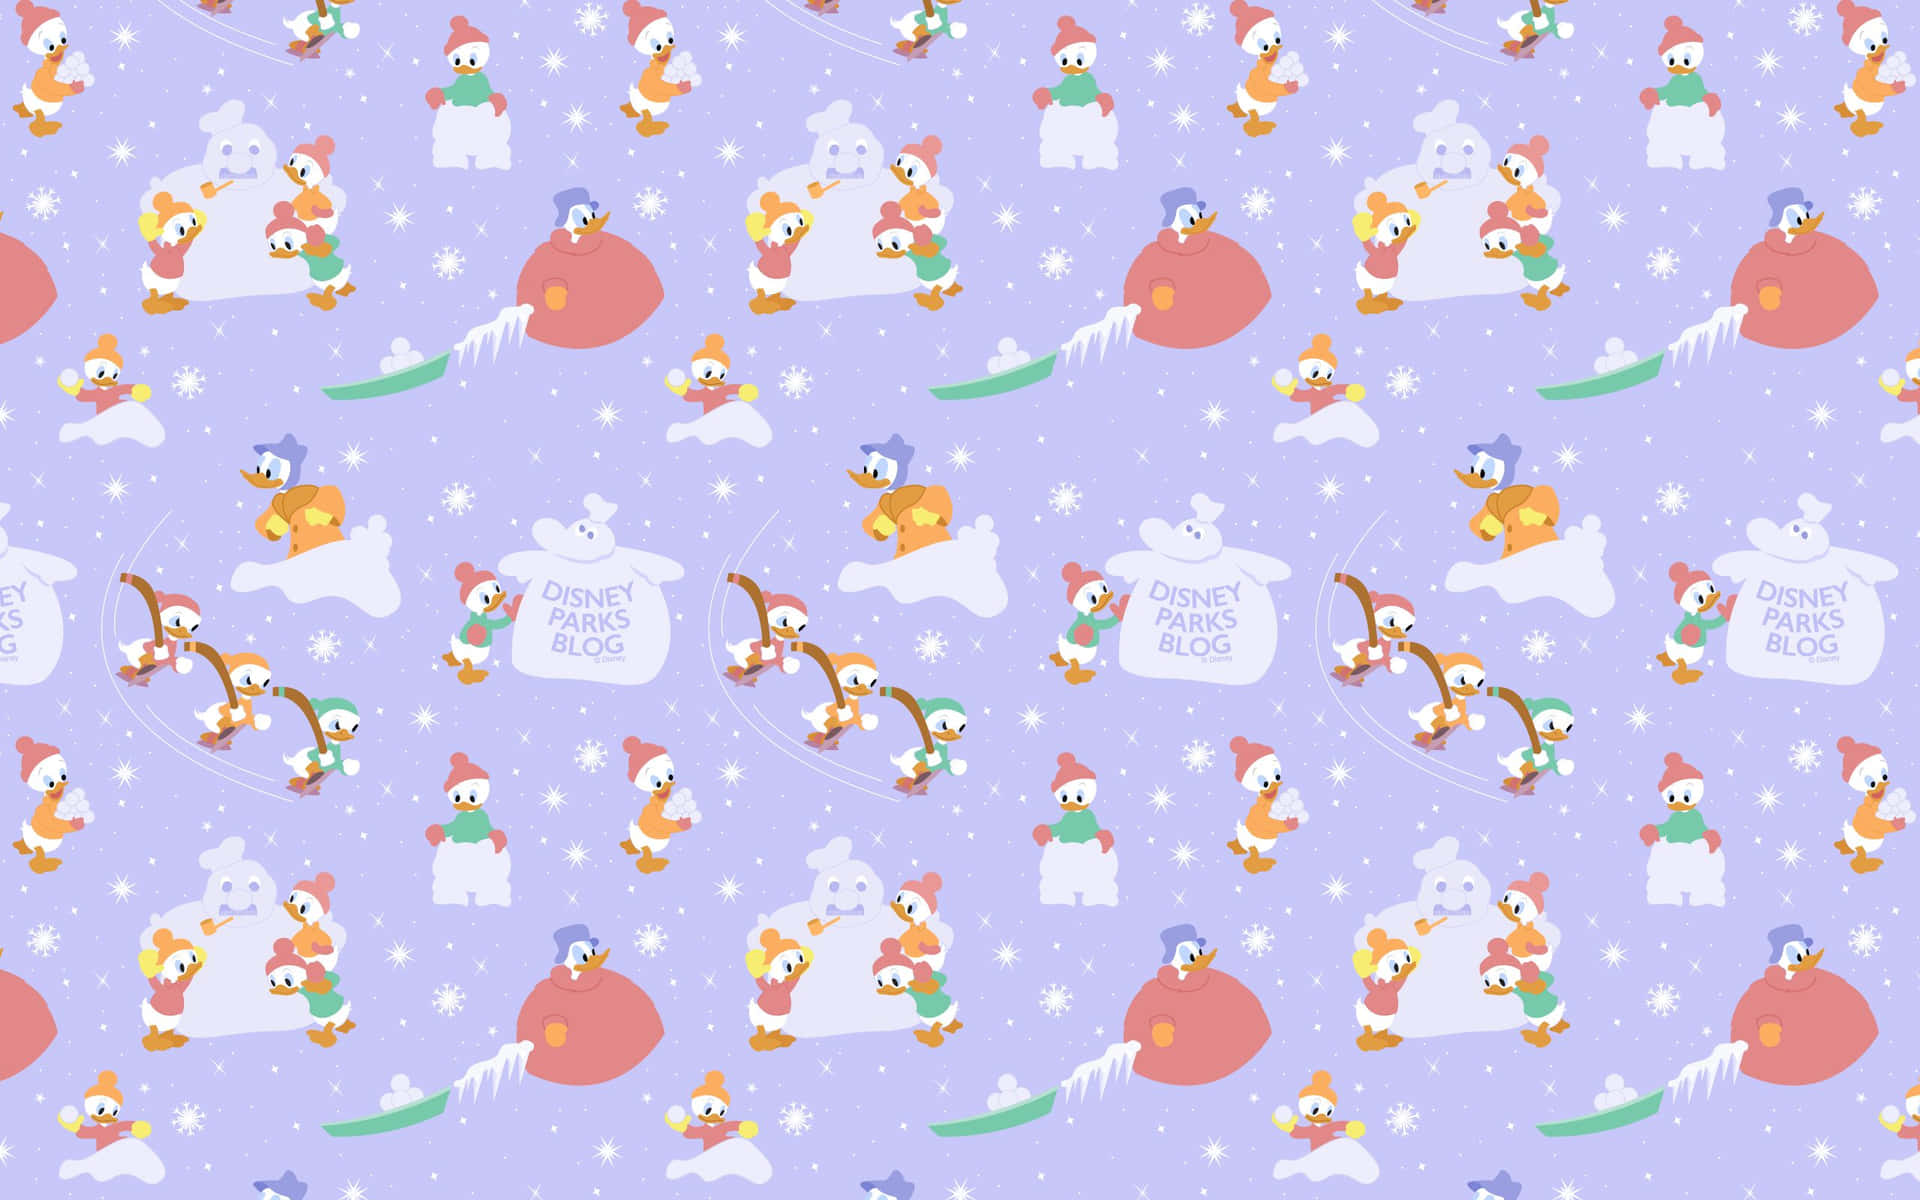 Get into the Holiday Spirit with this Disney Christmas iPad Wallpaper